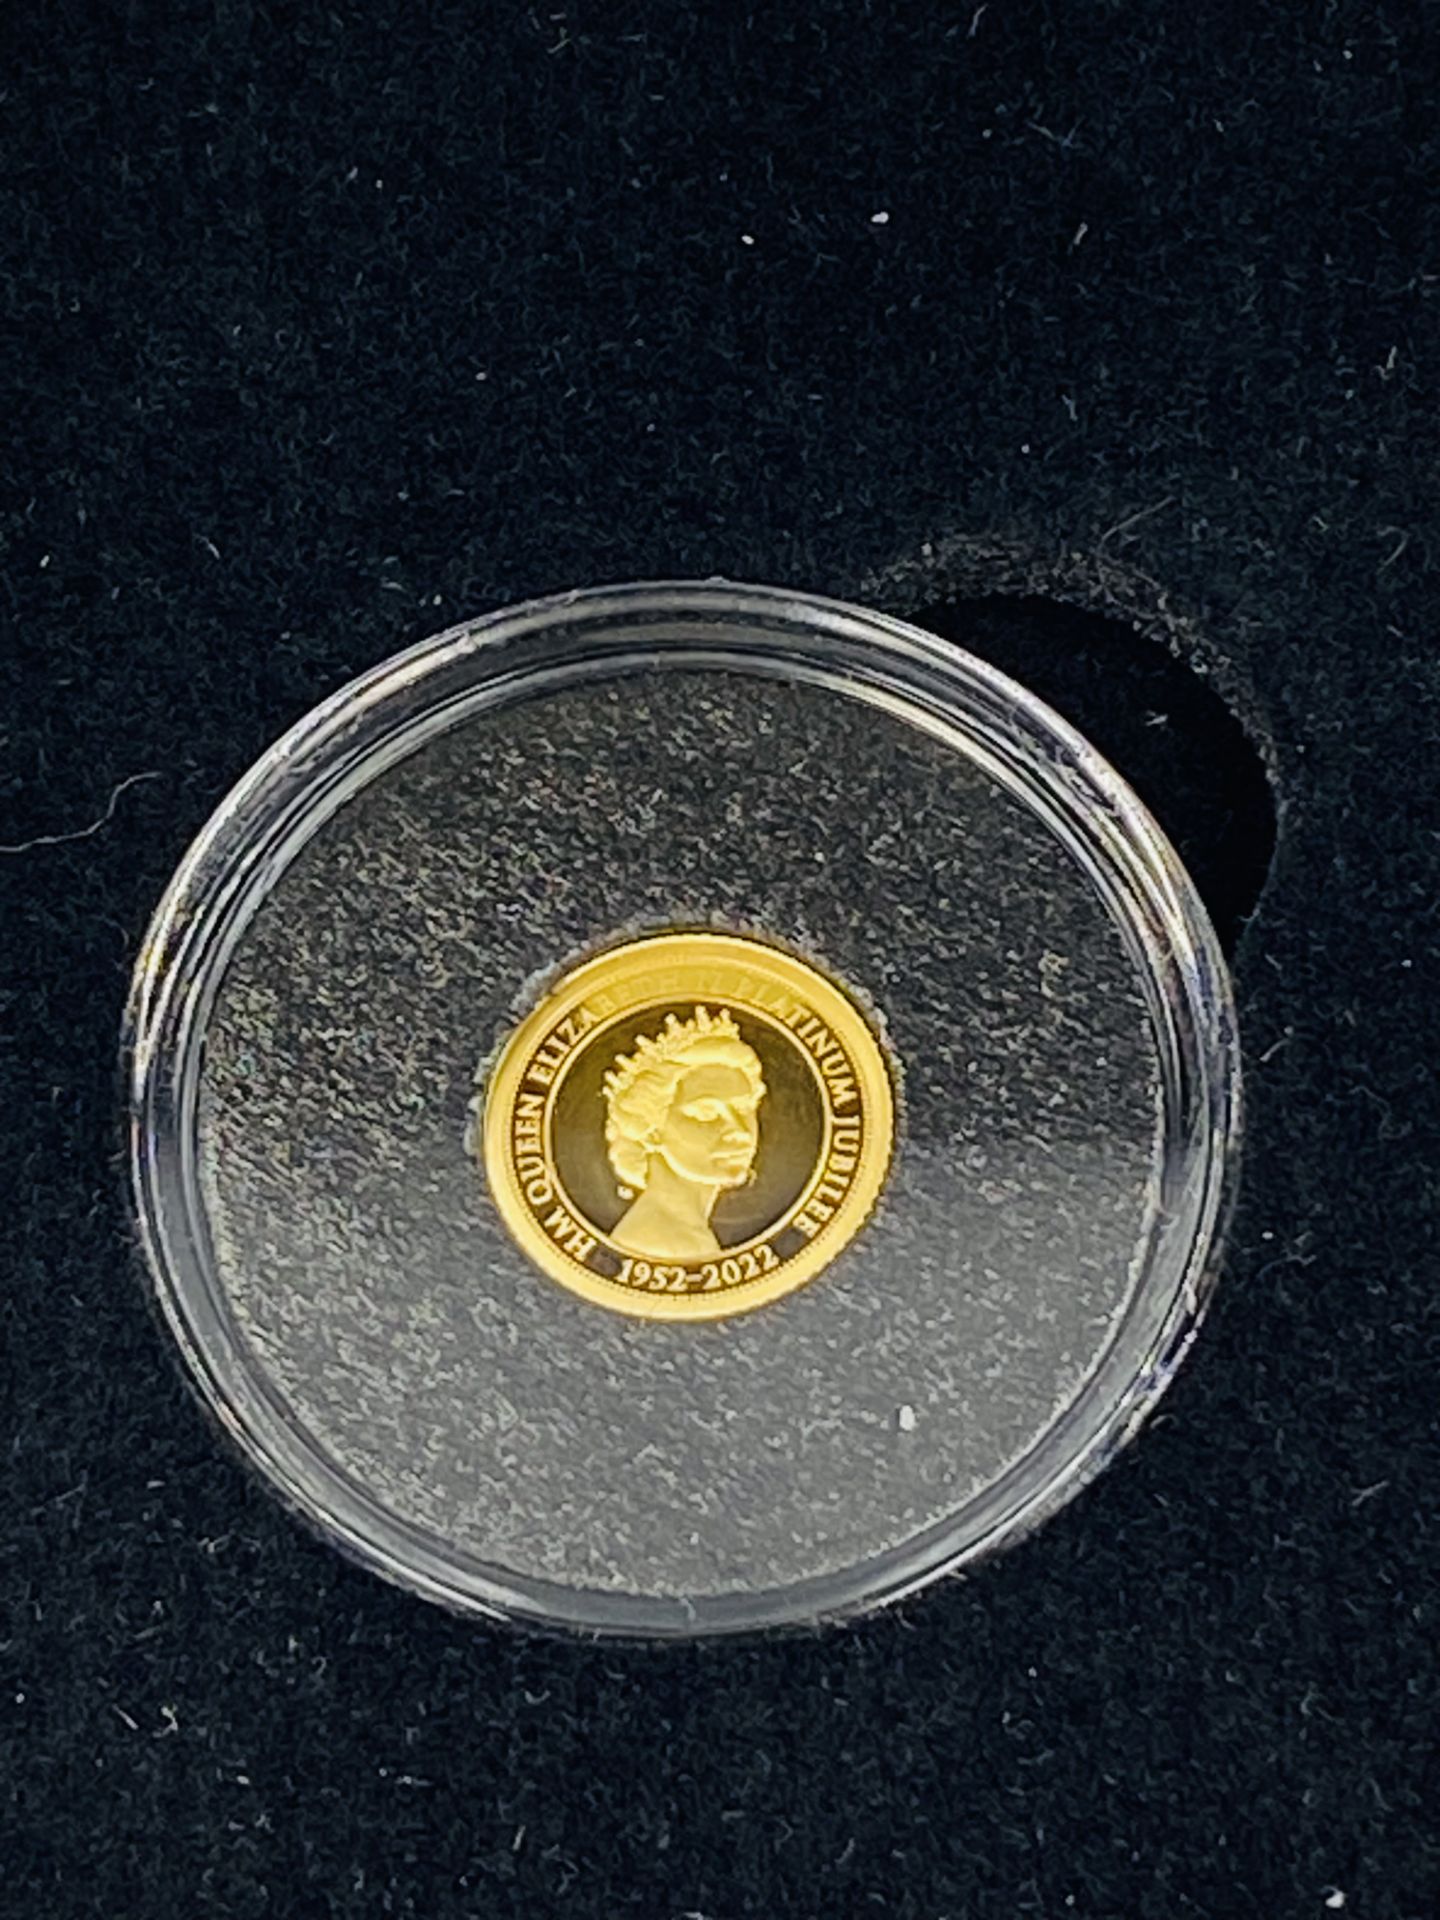 Platinum Jubilee half gram gold £5 coin, in box with Certificate of Authenticity. - Image 2 of 4